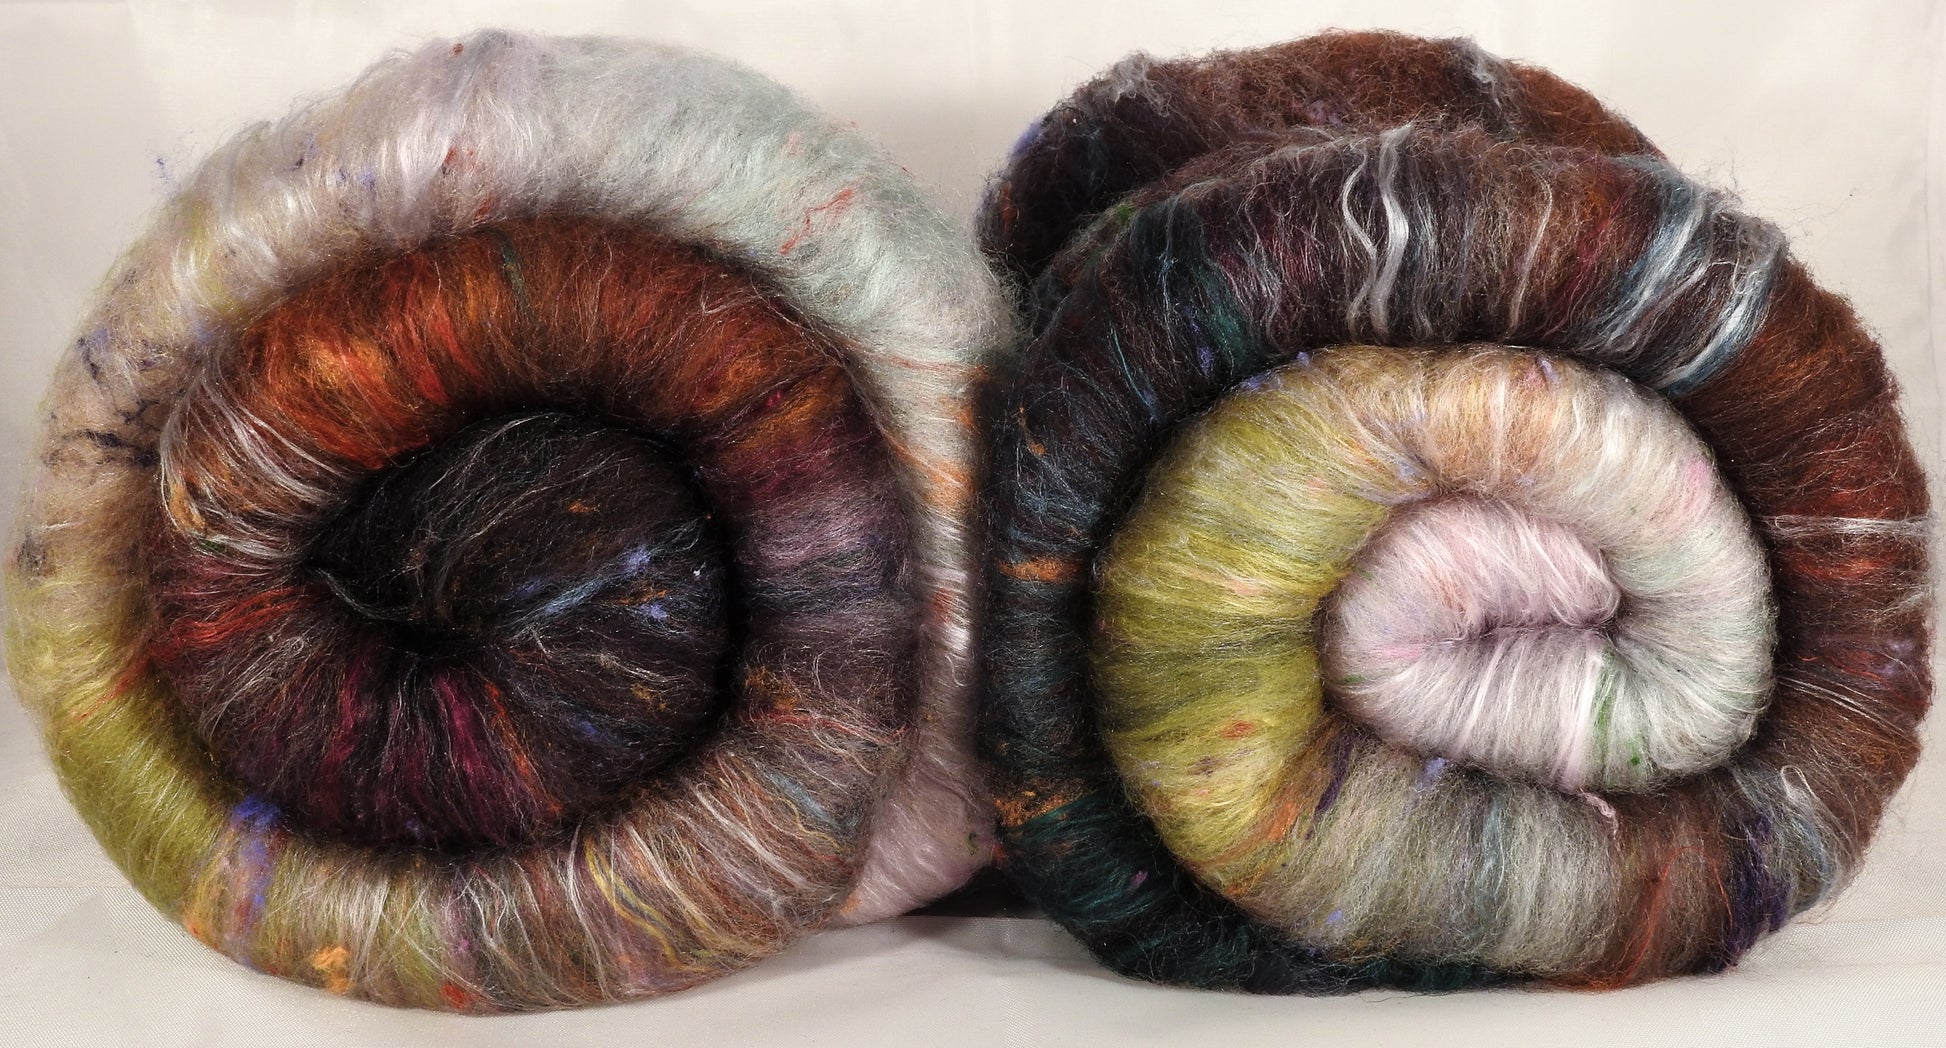 The Way - Roly Poly batts- 30% Bond and Corriedale fleeces, merino, rambouillet, tiny bits of Alpaca and bfl, silk, bamboo, silk noil (angelina in the sparkle batts) - Inglenook Fibers